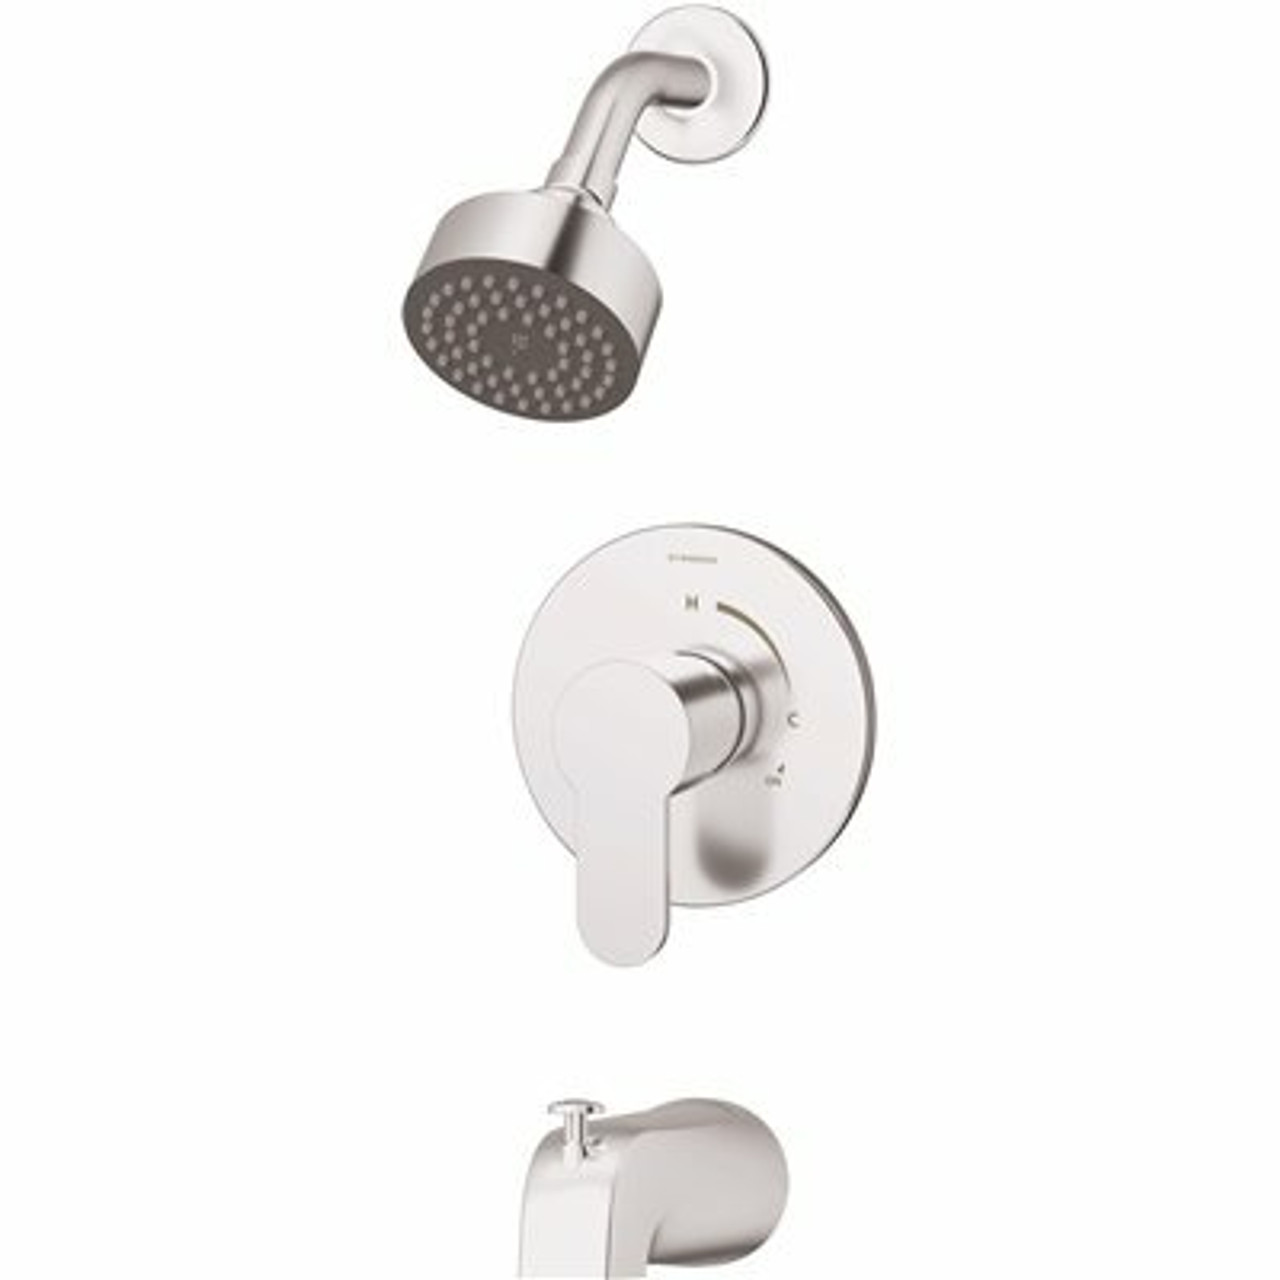 Symmons Identity 1-Handle Wall-Mounted Tub And Shower Faucet Trim Kit In Polished Chrome (Valve Not Included)